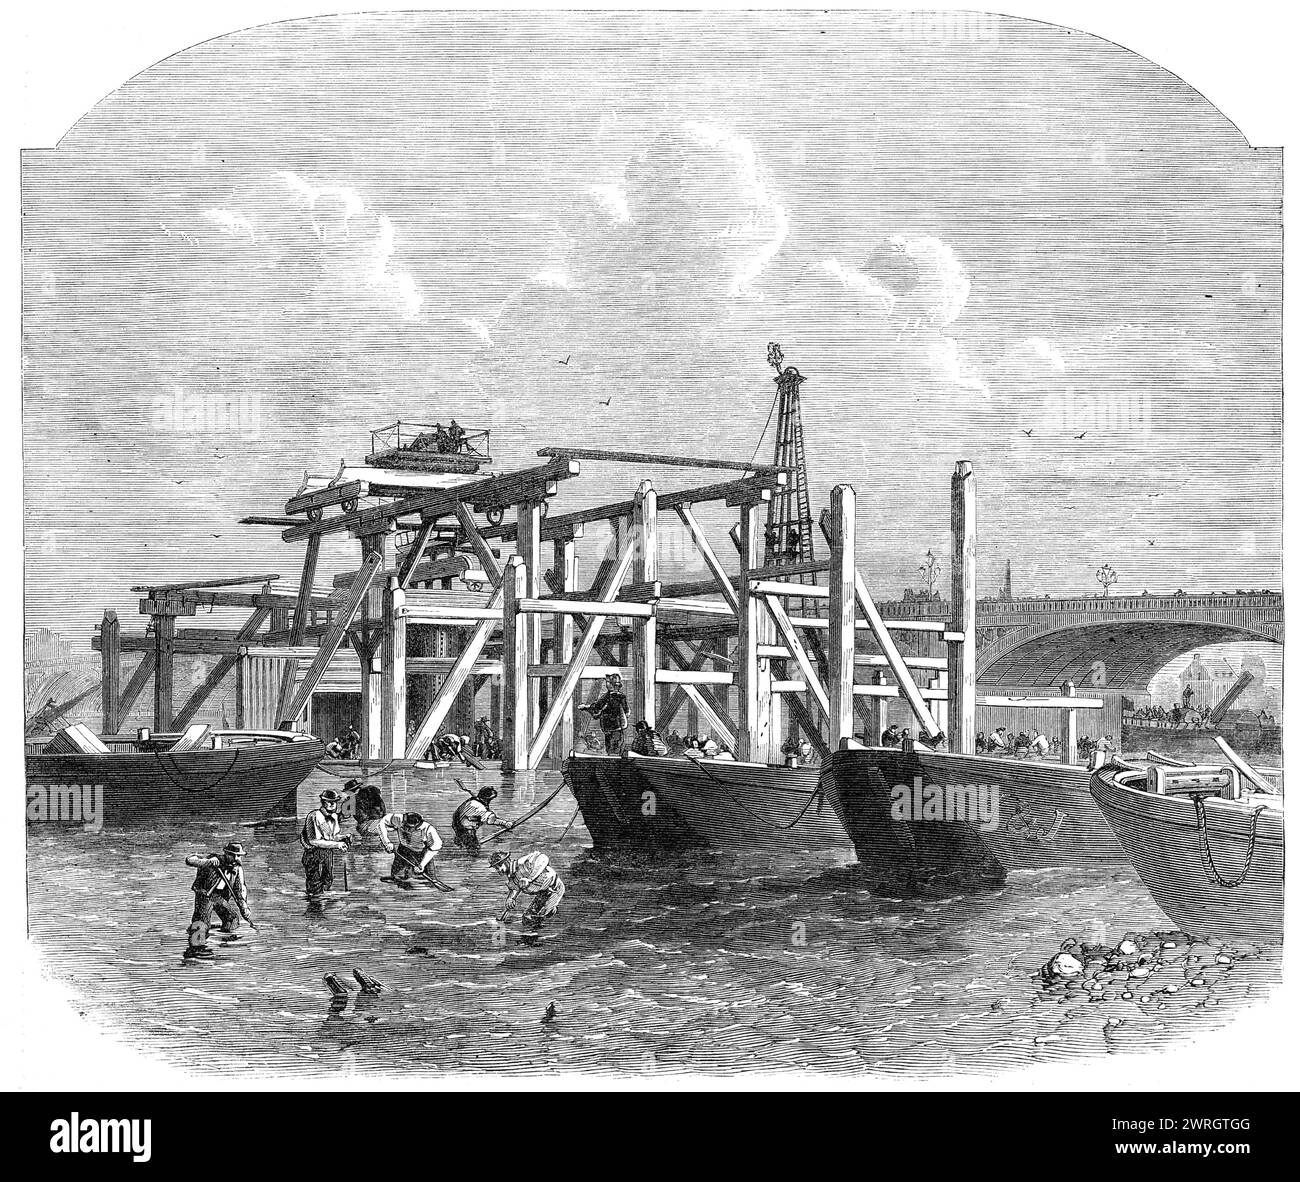 Commencement of the Thames Embankment works near Westminster Bridge, 1864. View of '...piles being driven in, and scaffolding of an extensive character being erected to support and carry the heavy cranes to be used in sinking caissons. This work is preparatory to forming a cofferdam, and thereafter proceeding with excavations for a solid foundation, which must necessarily be laid very deep...The caissons are twelve feet by seven, and the coffer-dams...are remarkable for being constructed, not of timber...but of iron, which, it is thought, will afford great advantages over the old-fashioned mat Stock Photo